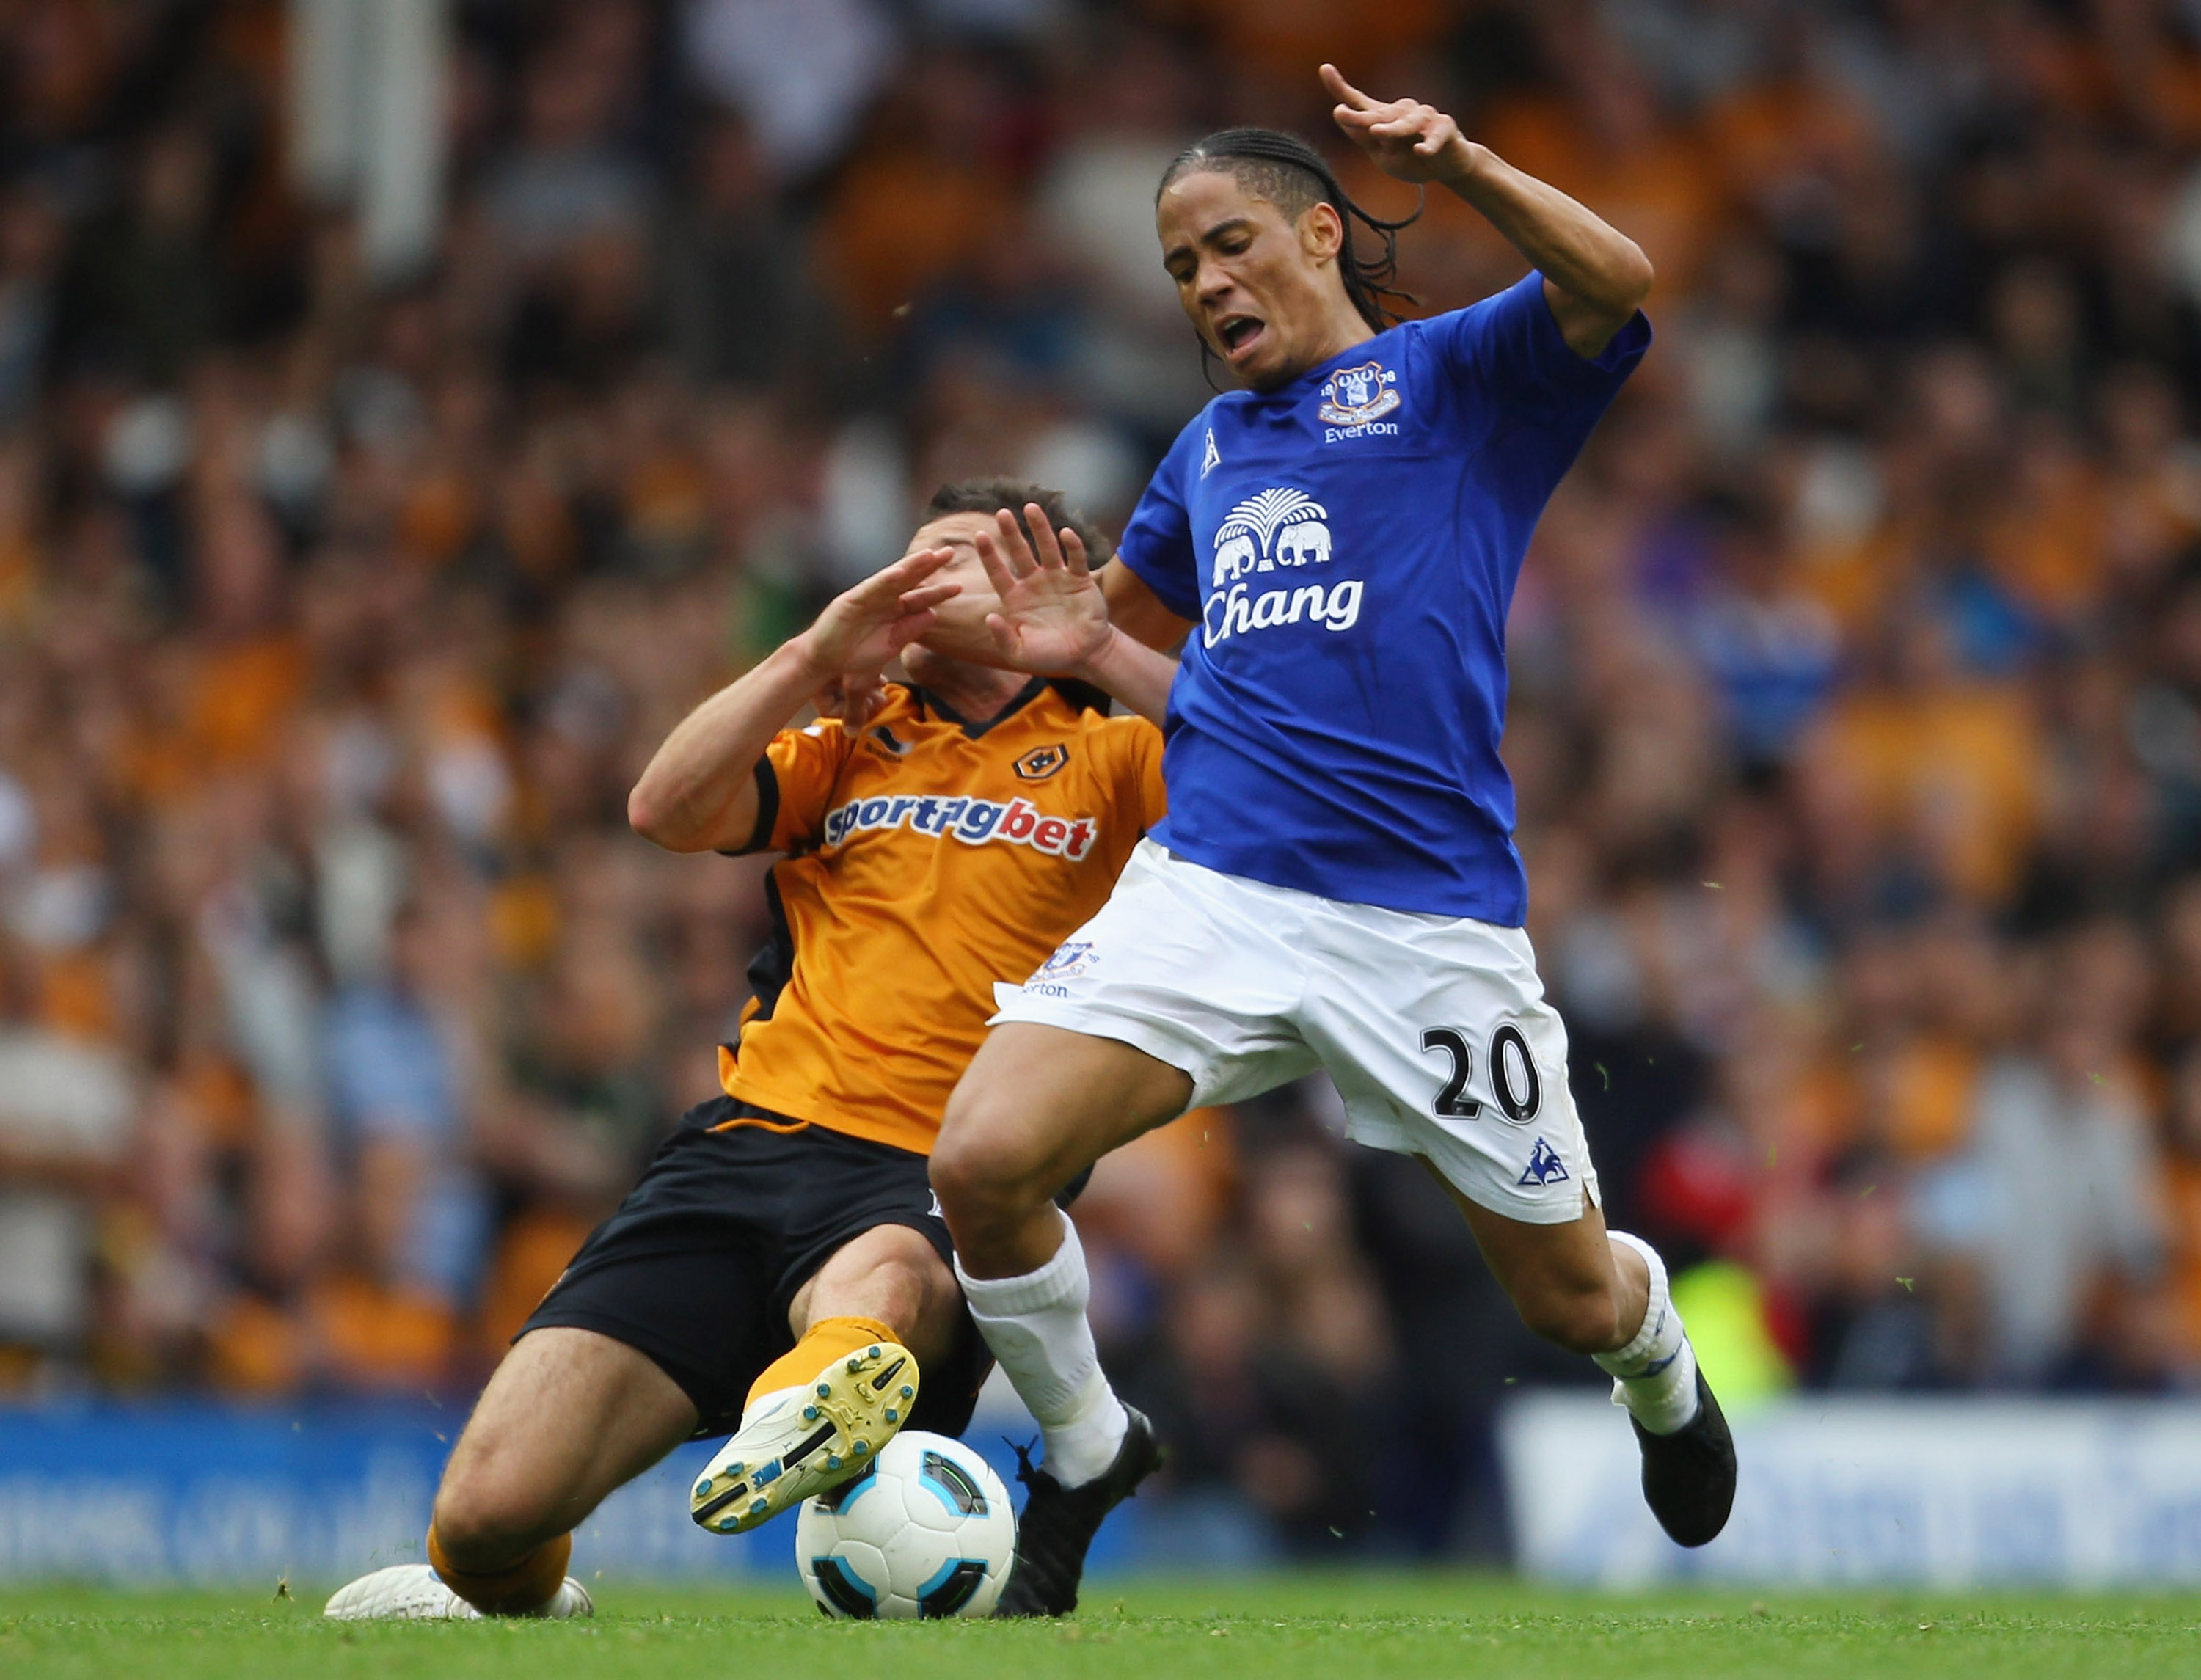 LIVERPOOL, ENGLAND - AUGUST 21:  Steven Pienaar of Everton is fouled by Matthew Jarvis of Wolverhampton Wanderers during the Barclays Premier League match between Everton and Wolverhampton Wanderers at Goodison Park on August 21, 2010 in Liverpool, Englan